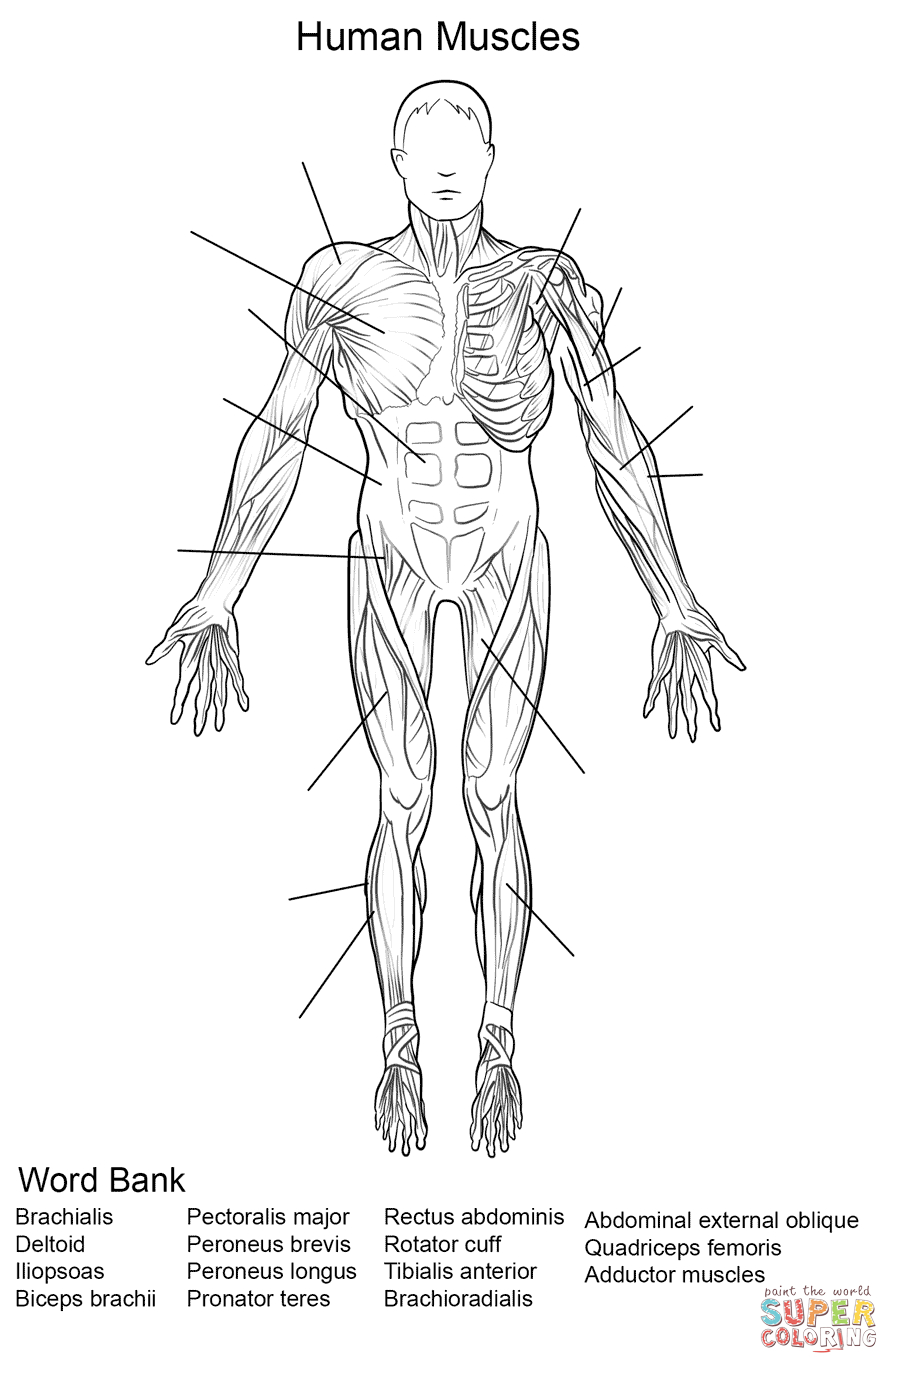 Human Muscles Front View Worksheet Coloring Page  Free Printable Regarding Muscle Worksheets For Kids